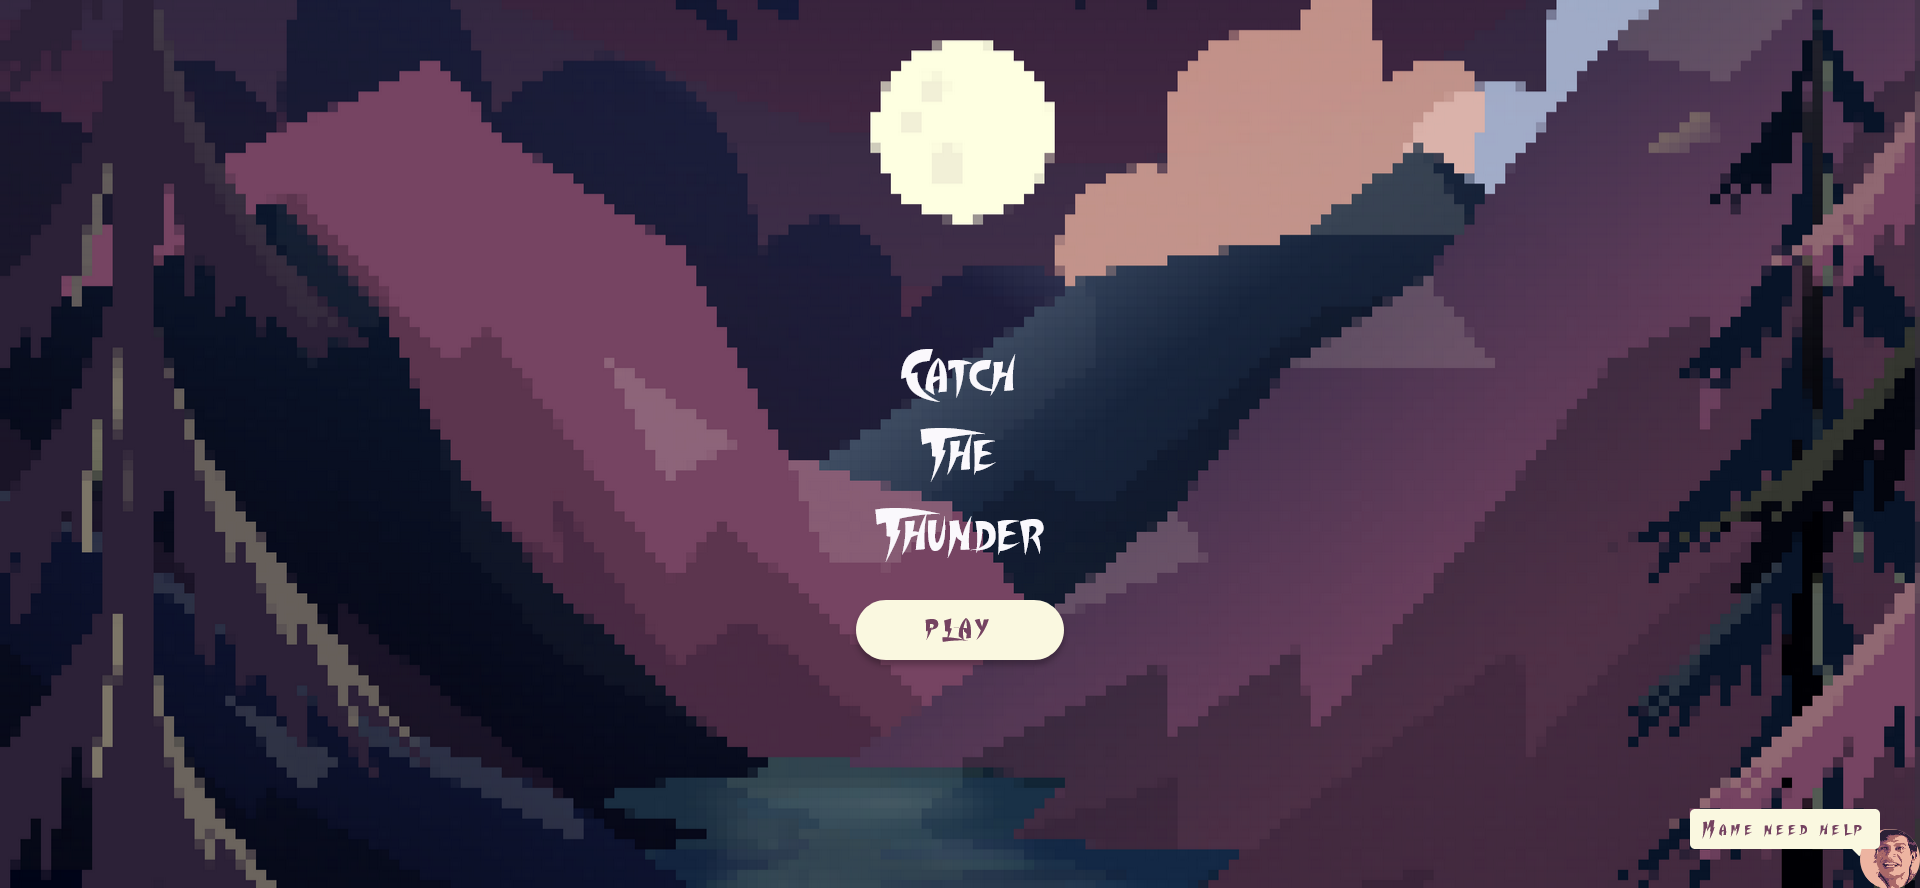 Catch The Thunder(Browser Game) website thumbnail